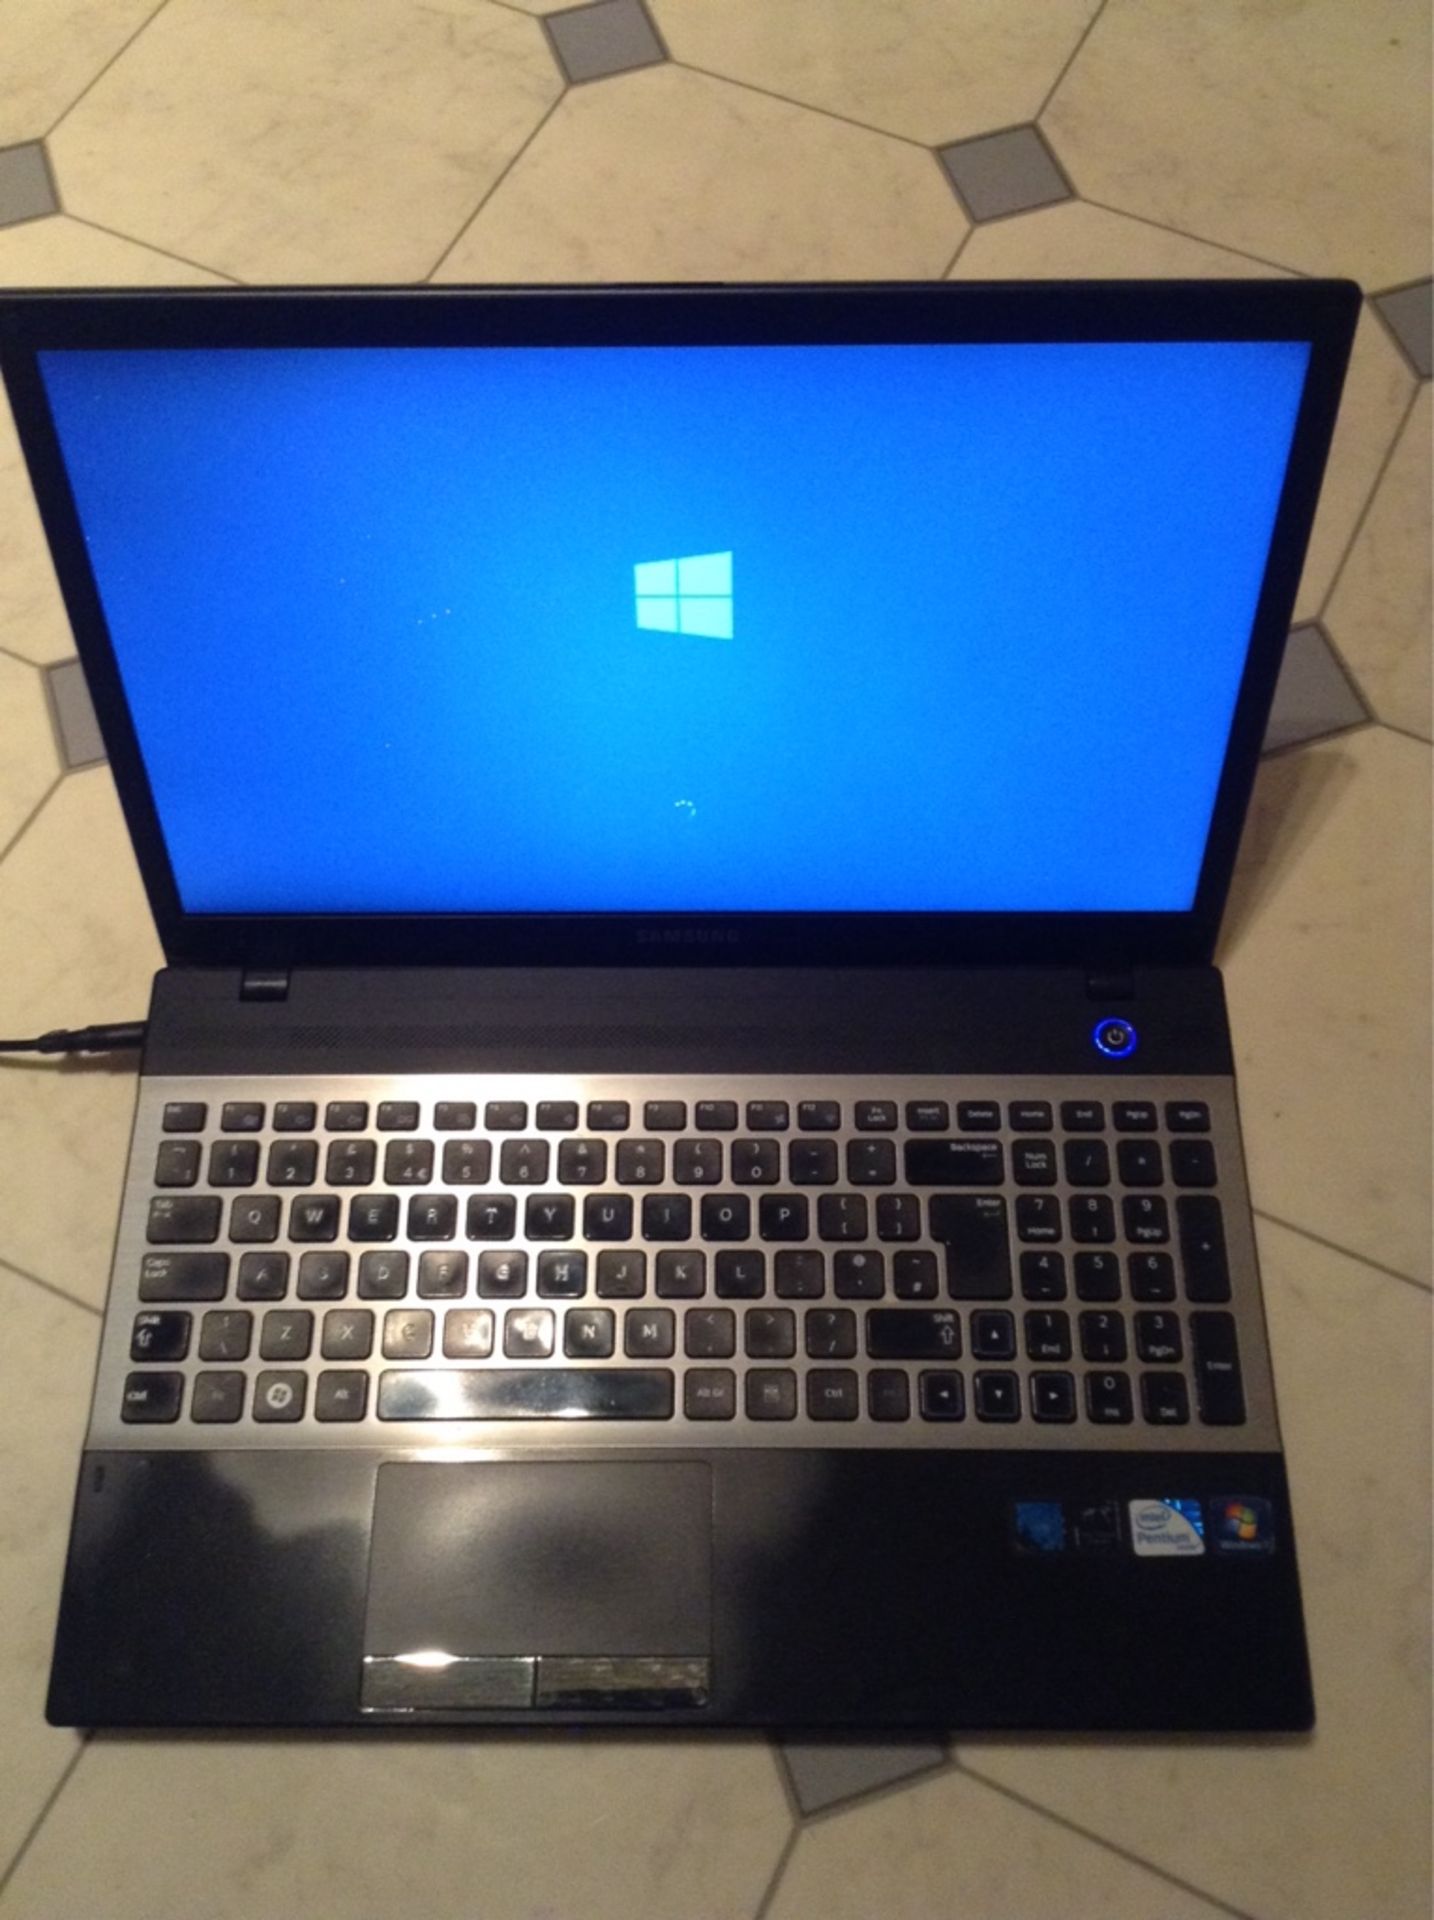 samsung notebook np300v5a 6/8gb windows 10 installed unregistered but problems loading needs wipe - Image 4 of 10